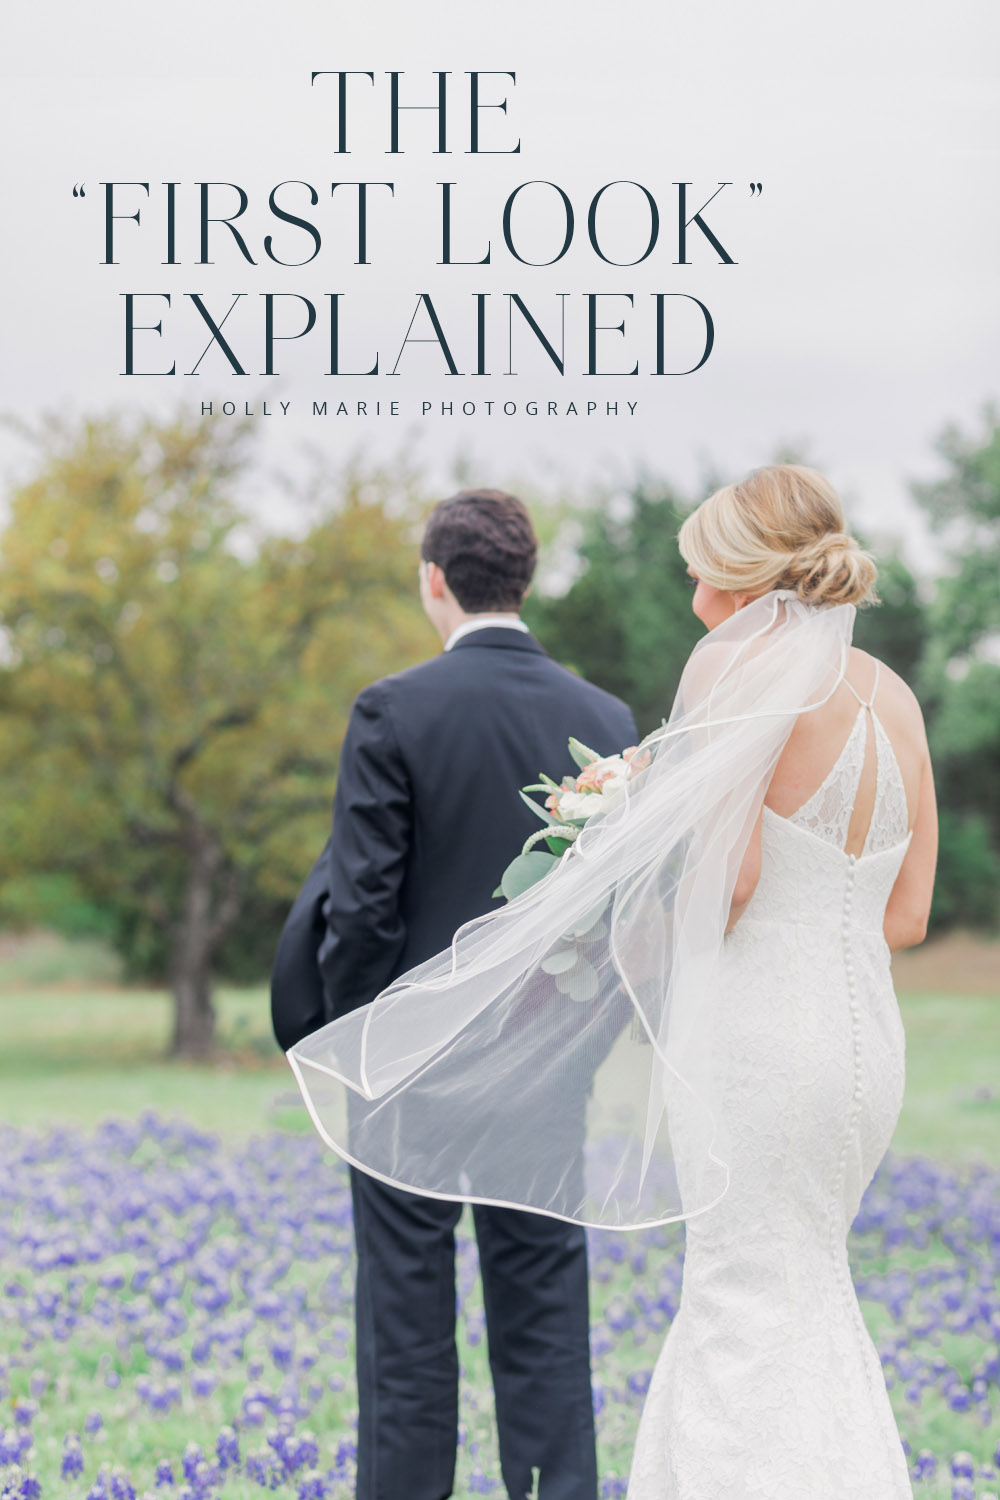 The First Look, Aisle Reveal, Southern Wedding, Wedding Photographer, Wedding Photography, ATX, Austin Texas, Holly Marie Photography, Bride, Education, Timeline Tips, Wedding Planning